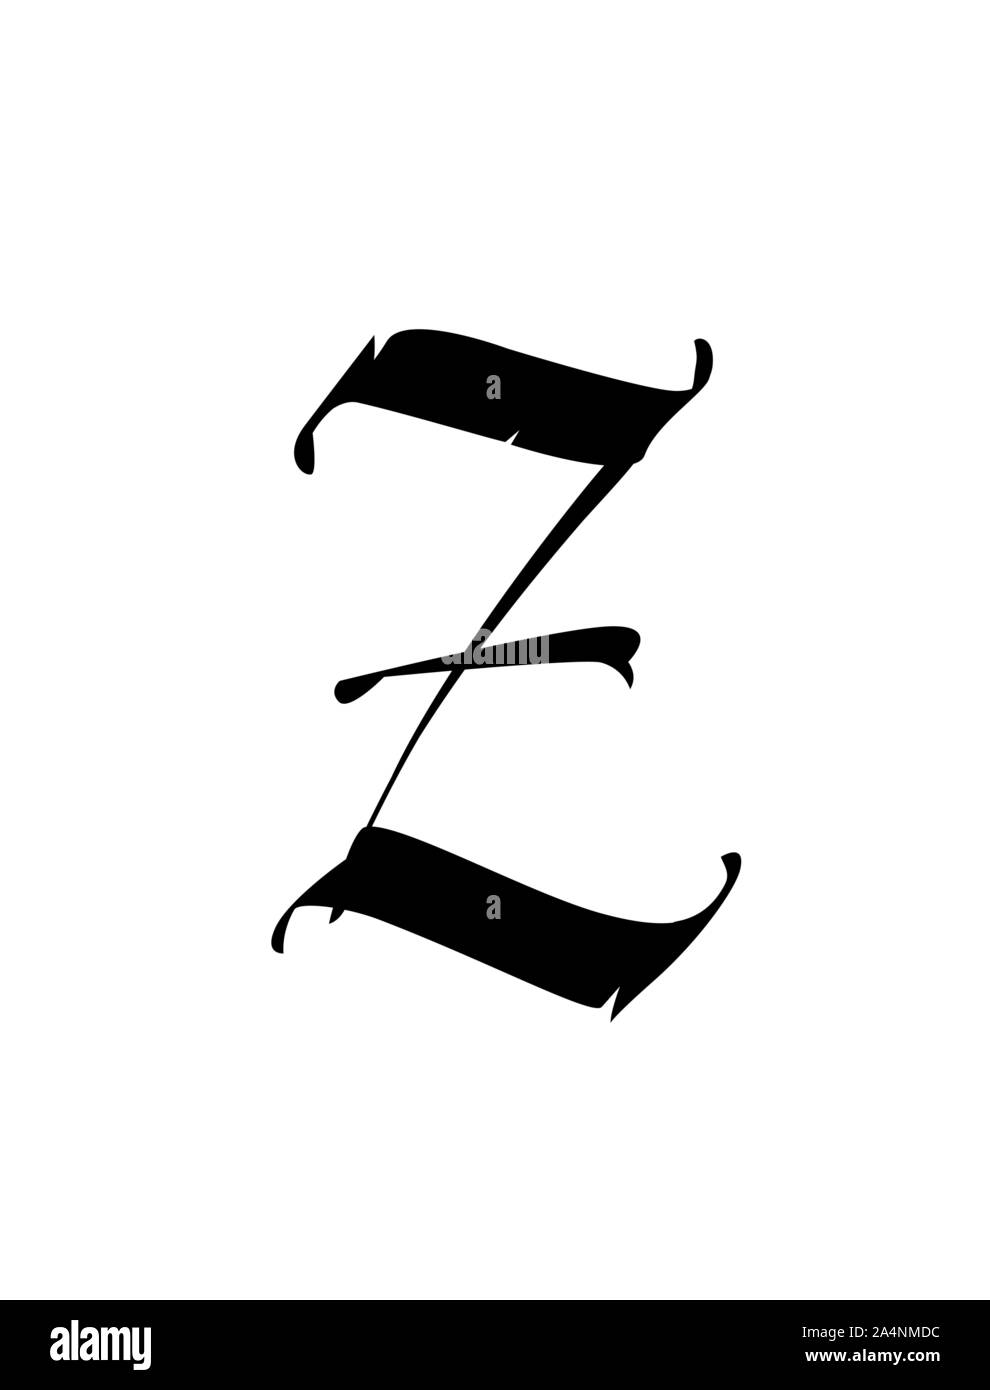 30 Letter Z Tattoo Designs Ideas and Templates  Tattoo Me Now